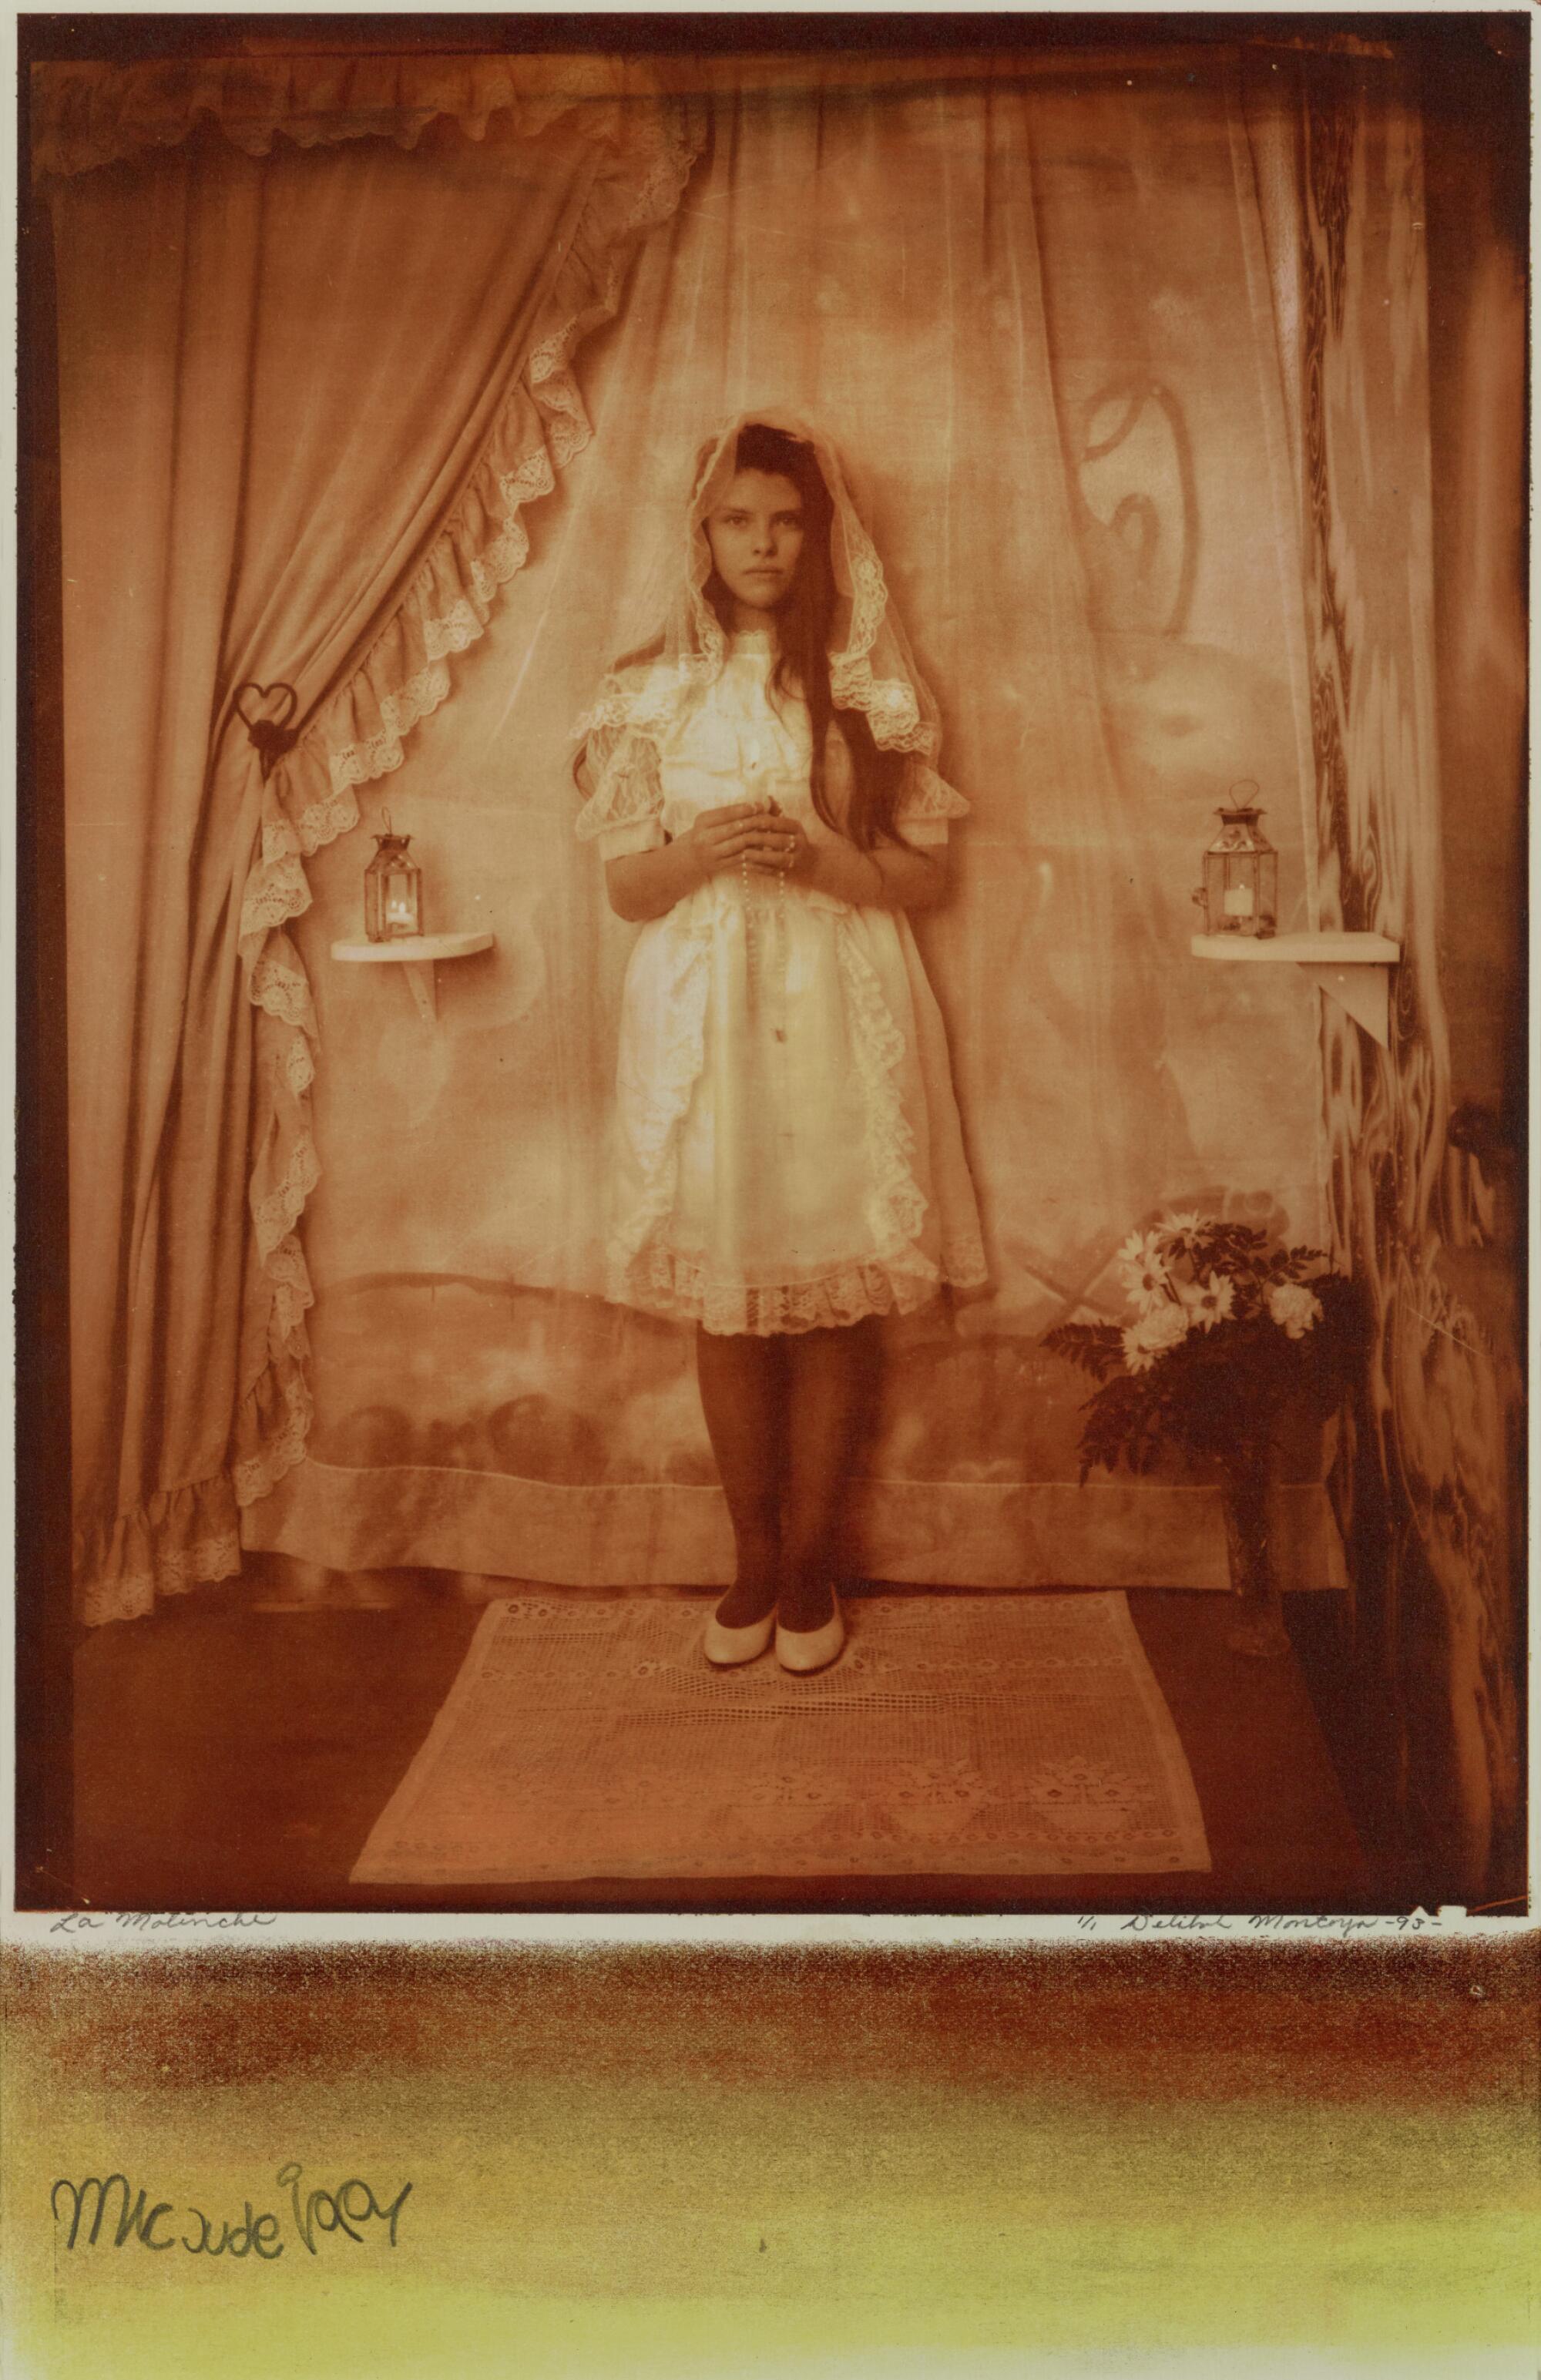 A sepia toned image shows a young girl in First Communion dress and a veil